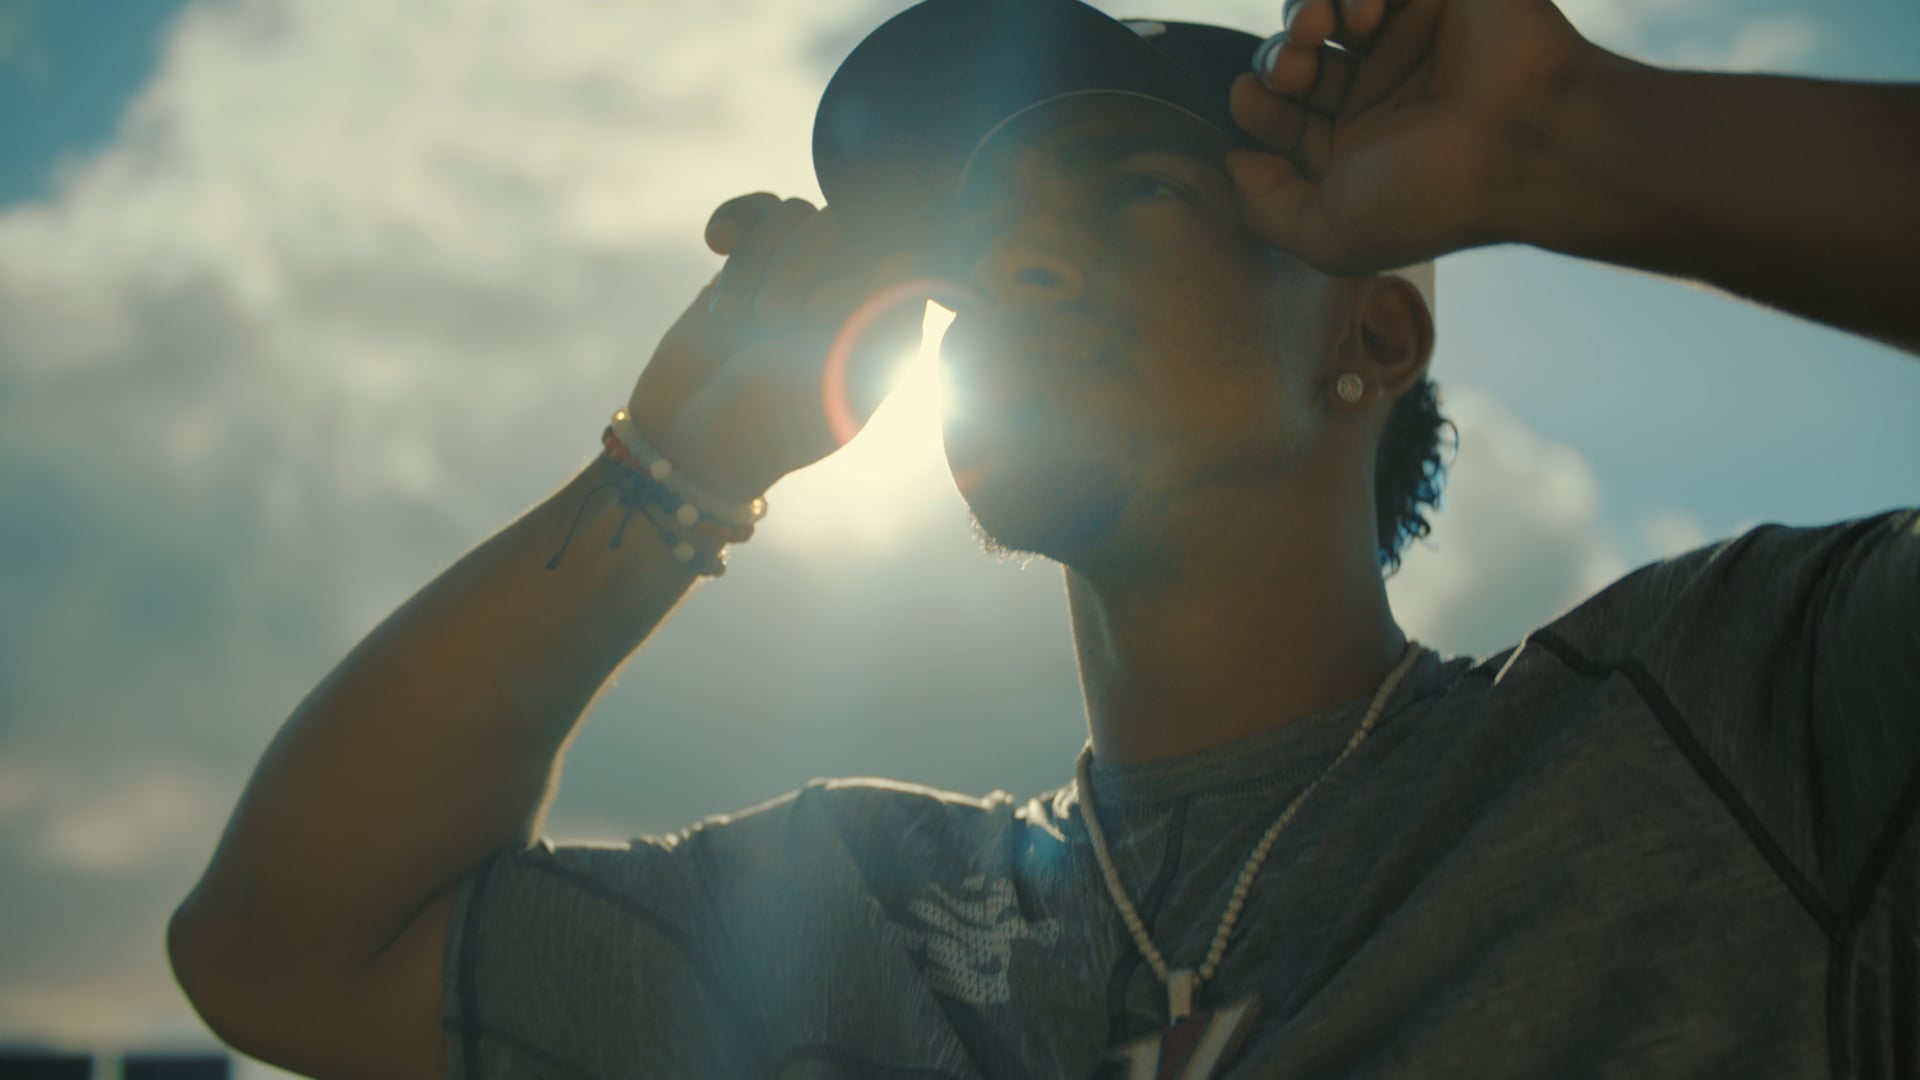 New Balance - Cypher Series feat. Francisco Lindor (Director's Cut)